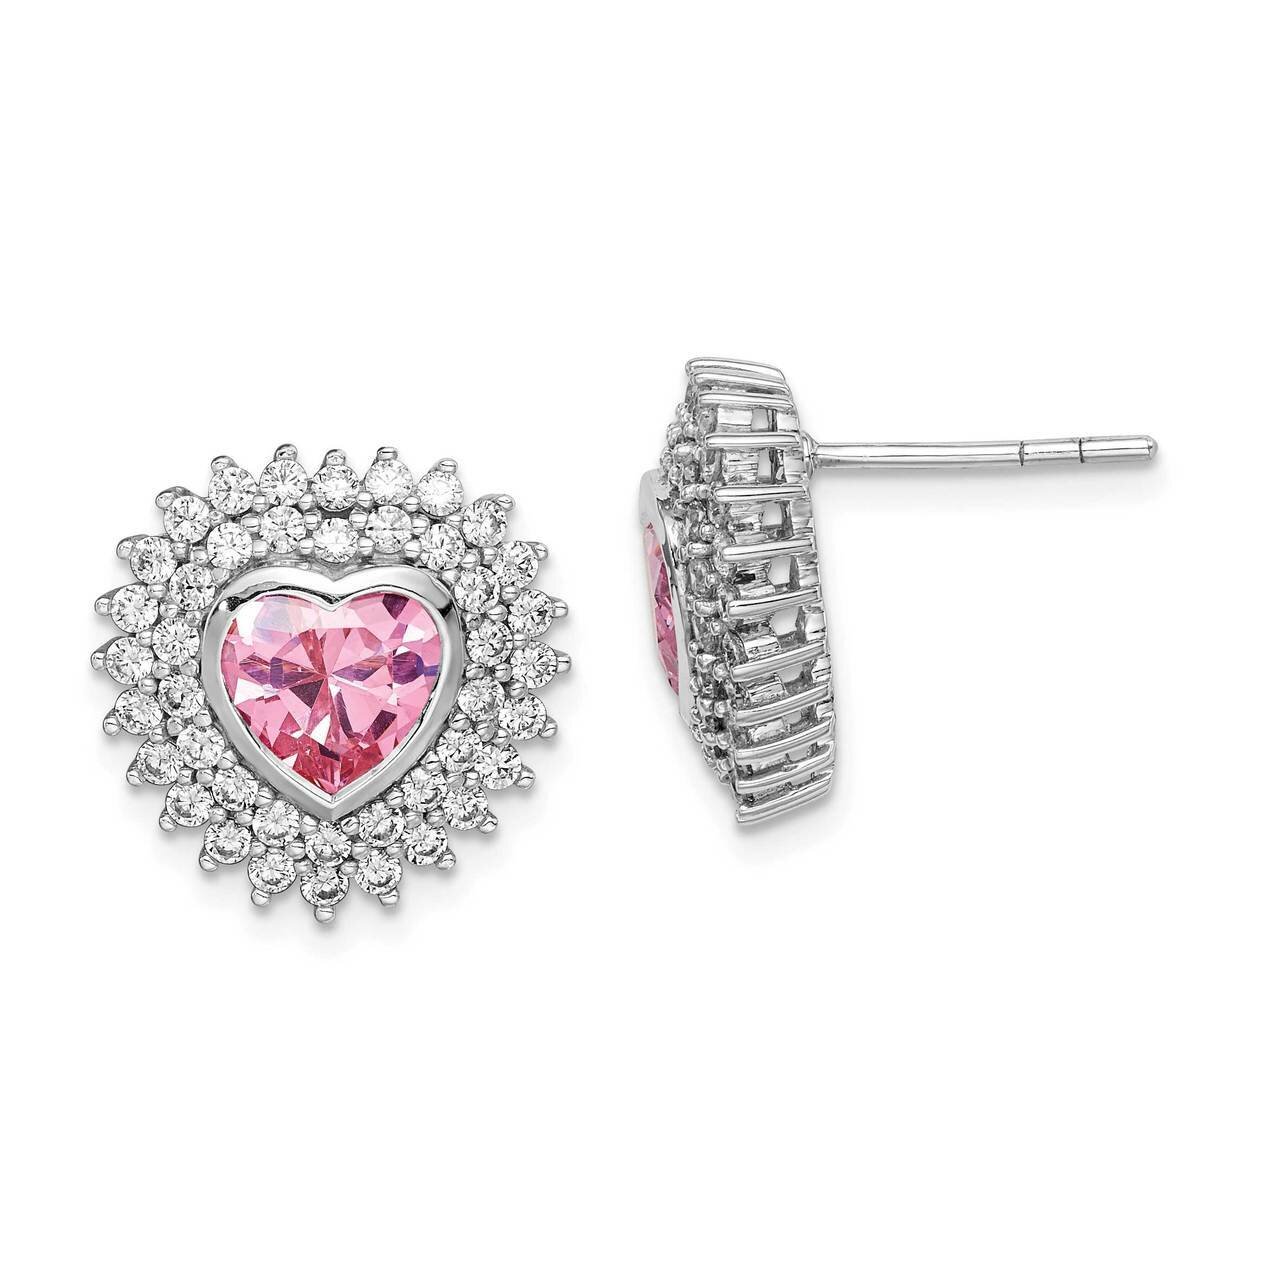 6mm Pink Heart CZ Diamond Post Earrings Sterling Silver Rhodium-plated QE14281